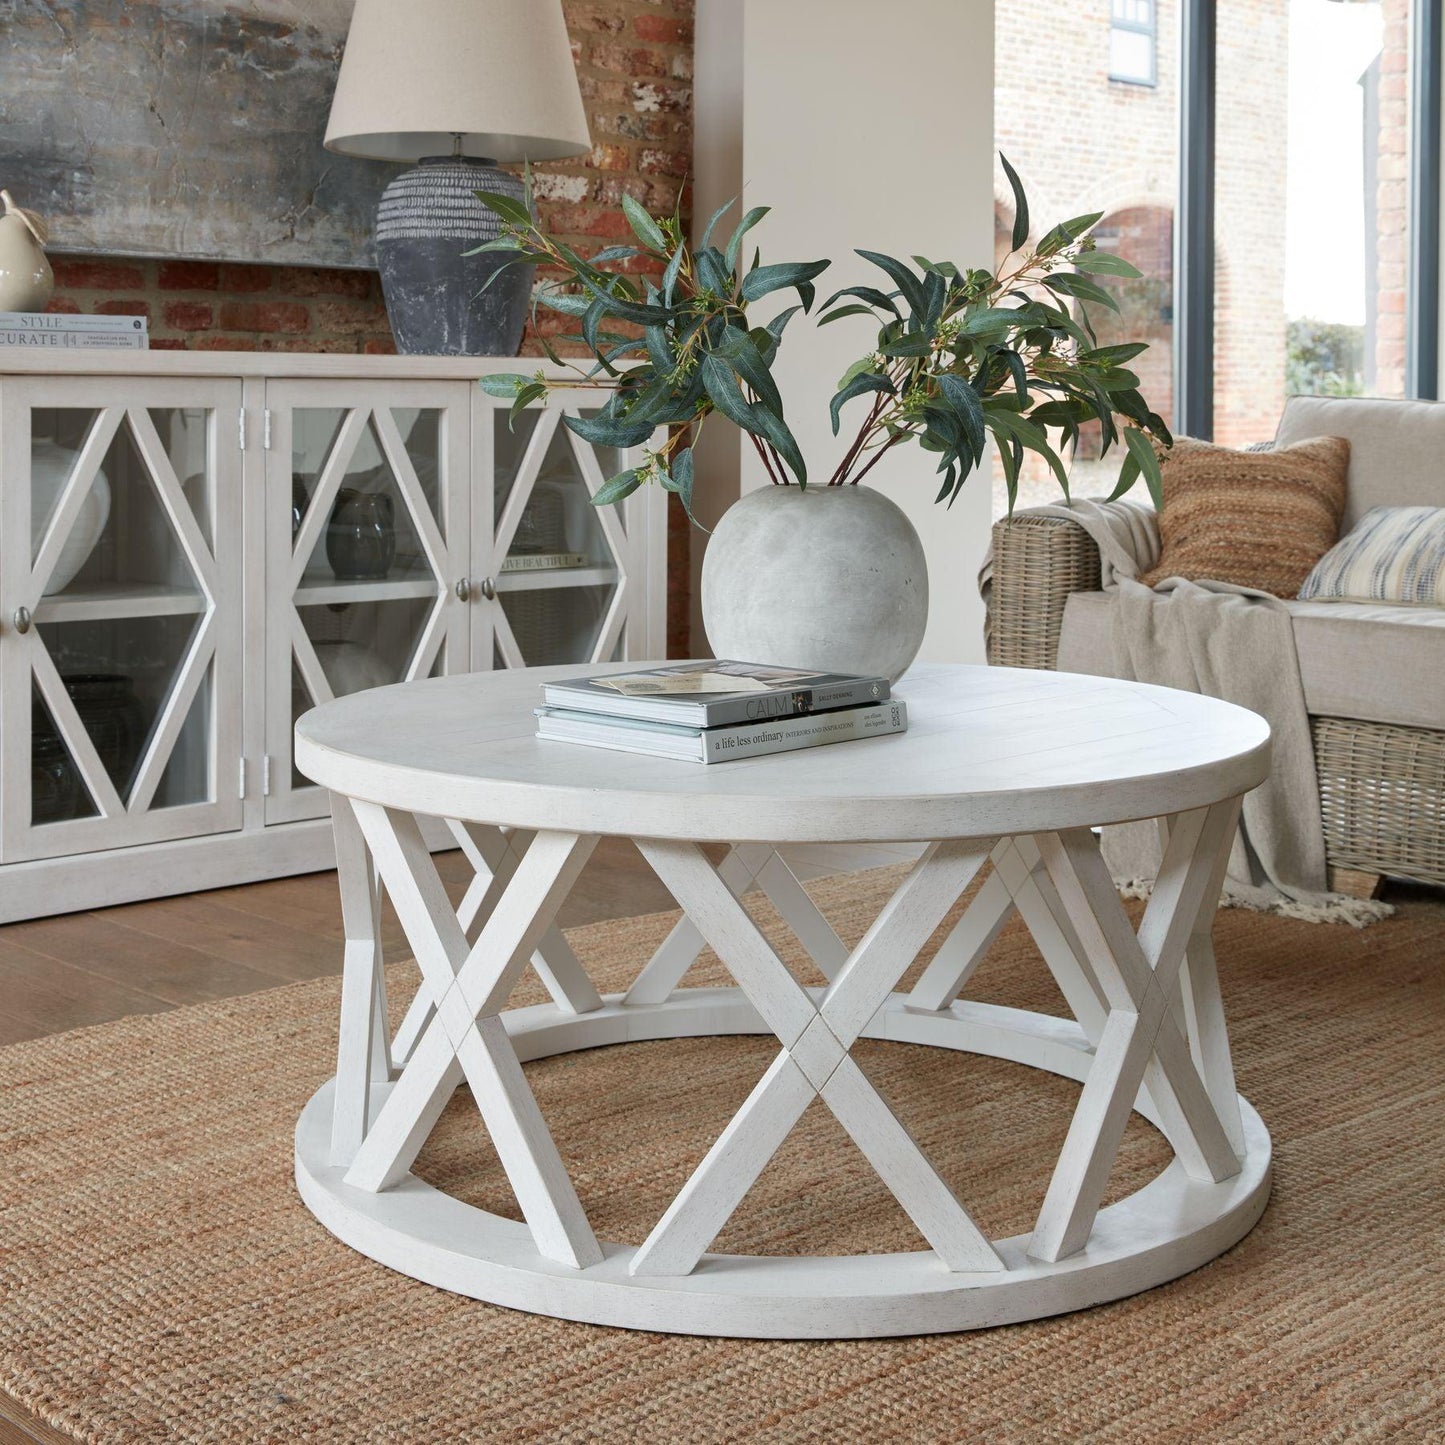 Stamford Plank Collection Round Coffee Table - Abode Decor